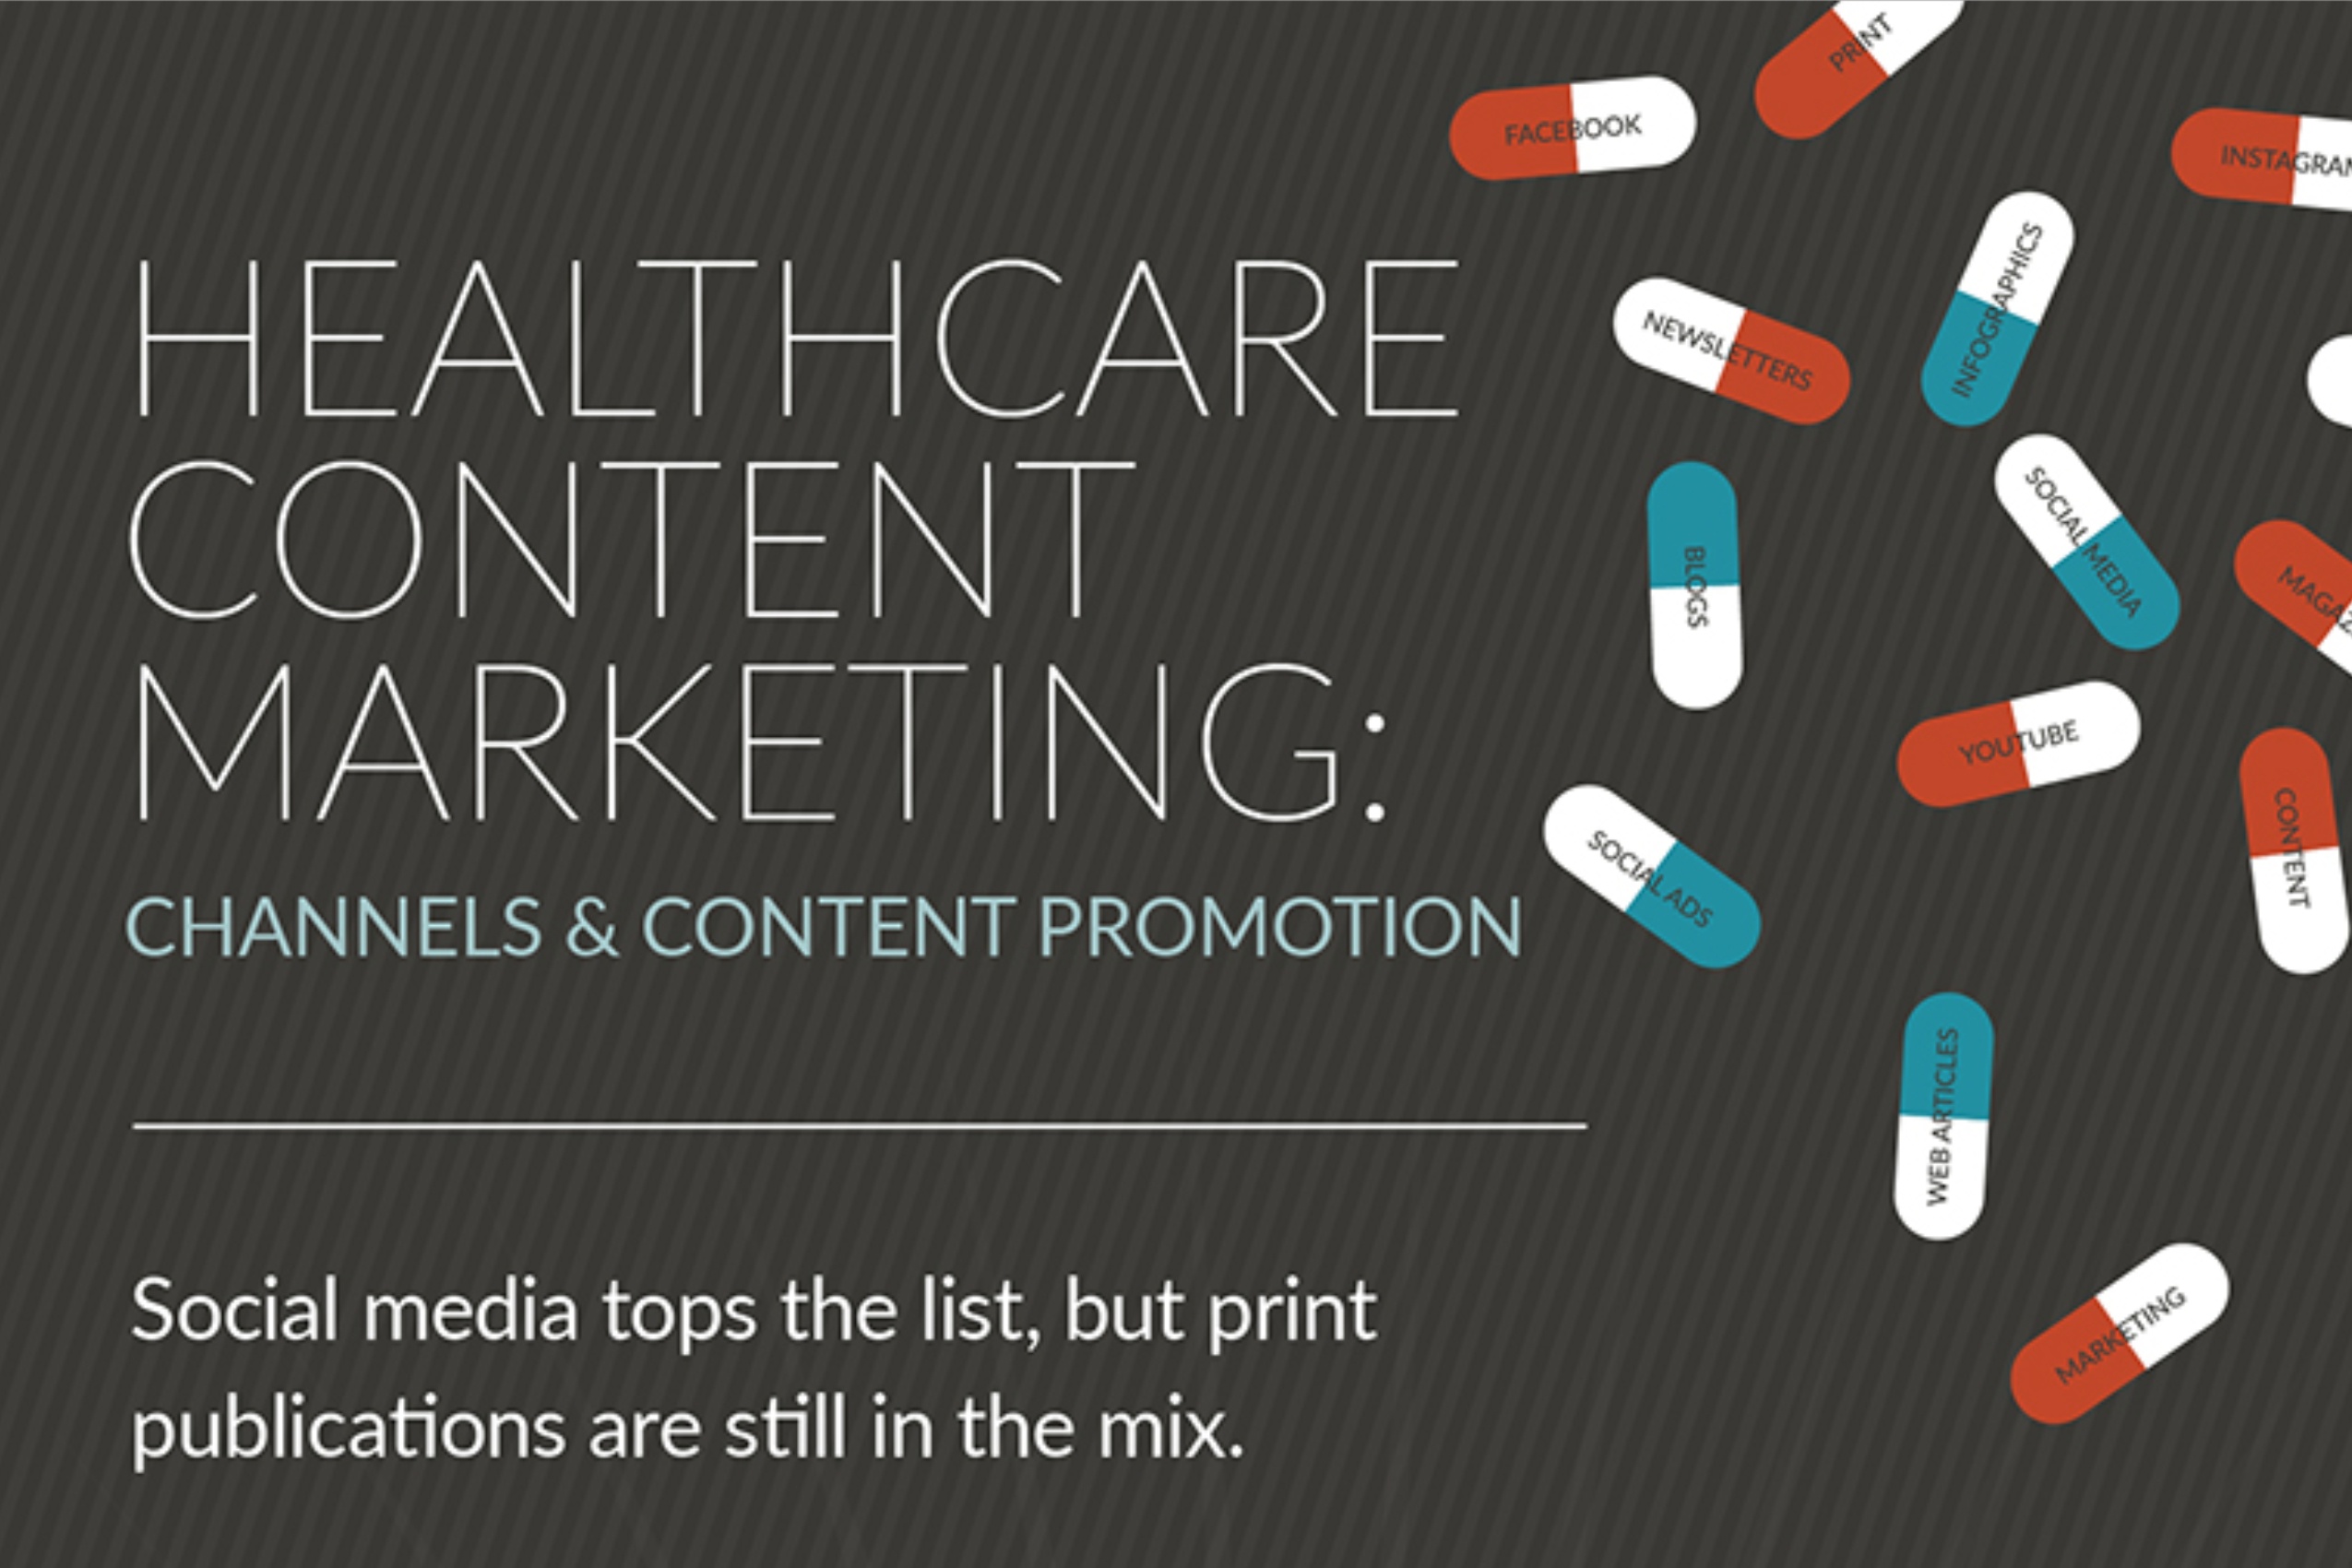 Healthcare Content Marketing: Channels & Content Promotion (infographic)